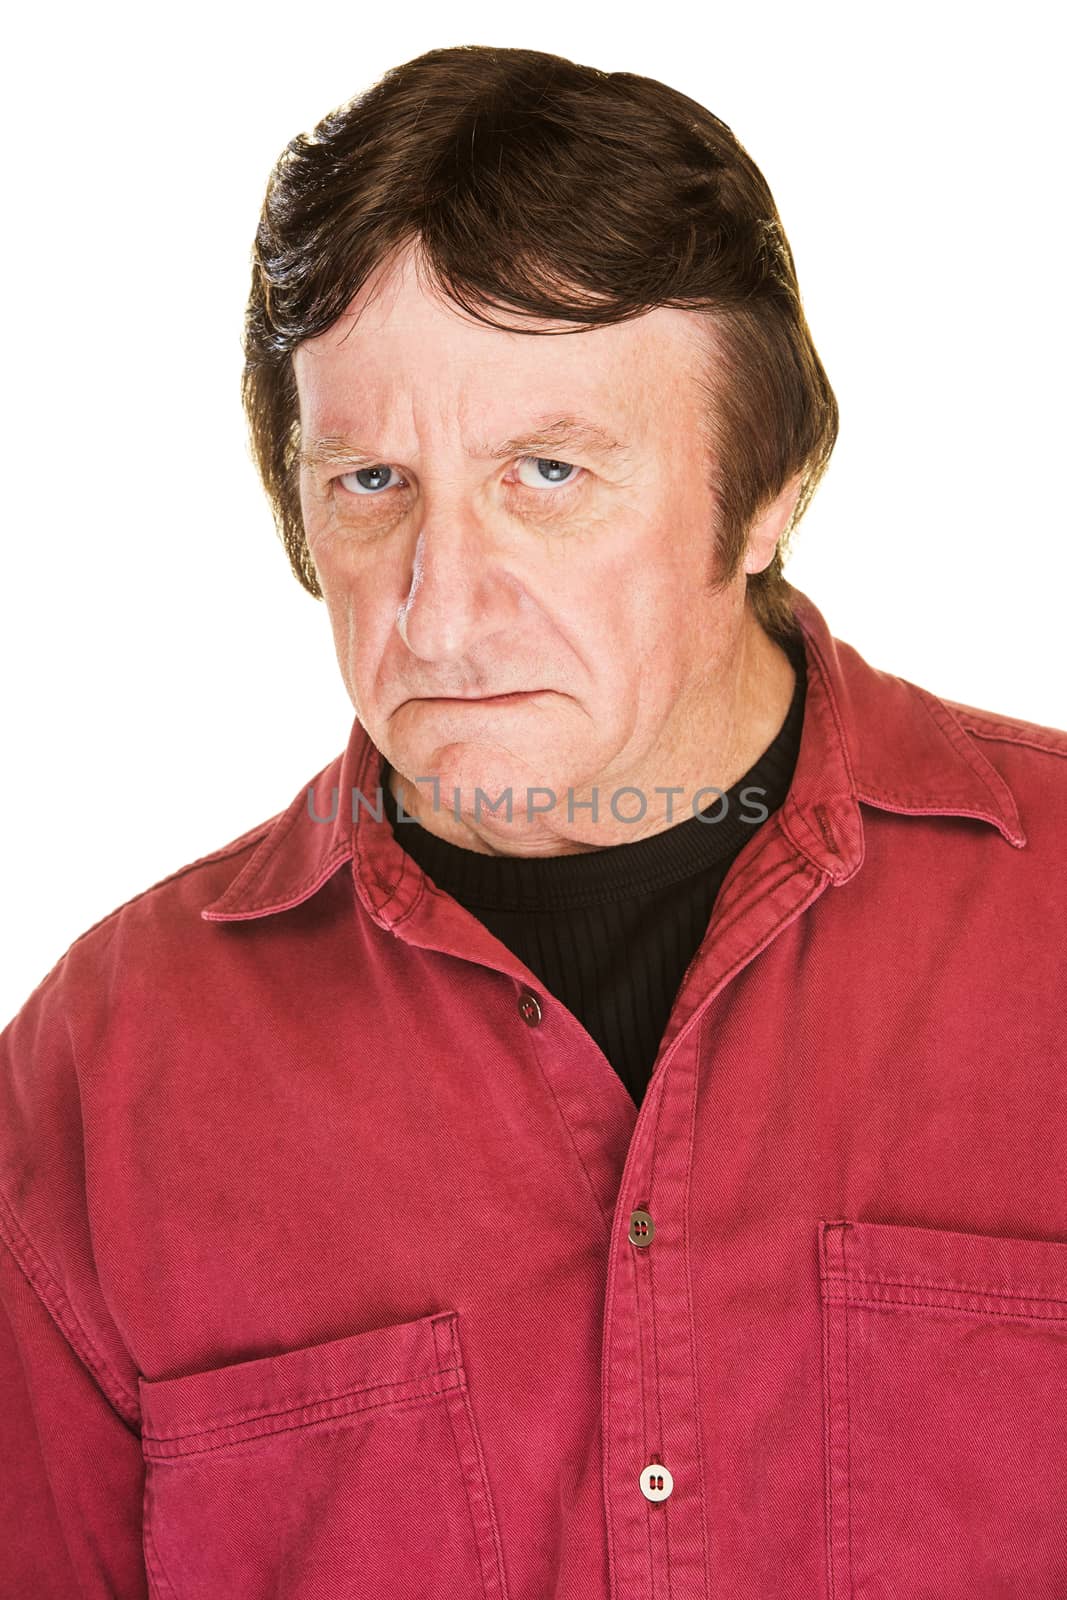 Suspicious man in red frowning over white background